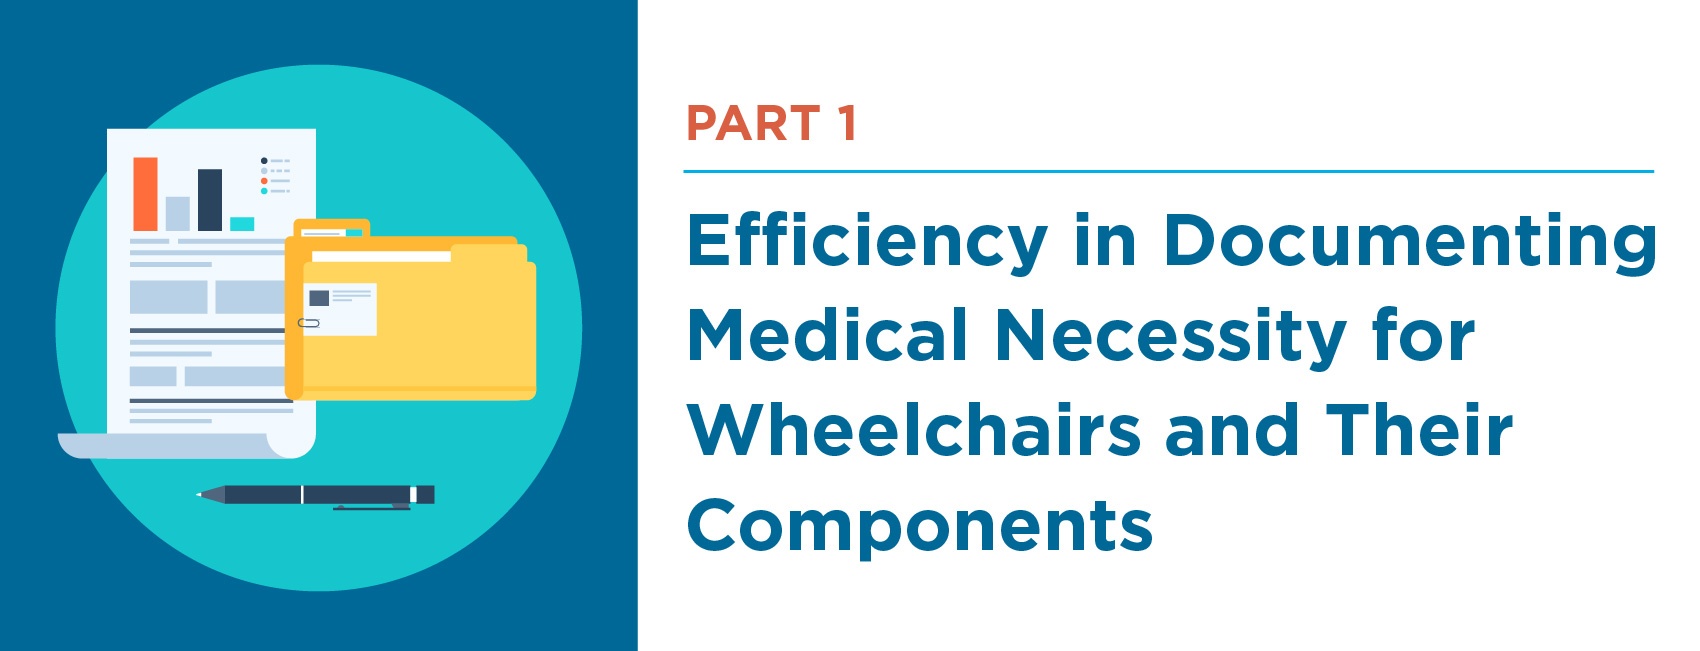 Efficiency In Documenting Medical Necessity For Wheelchairs And Their Components Part 1 6482